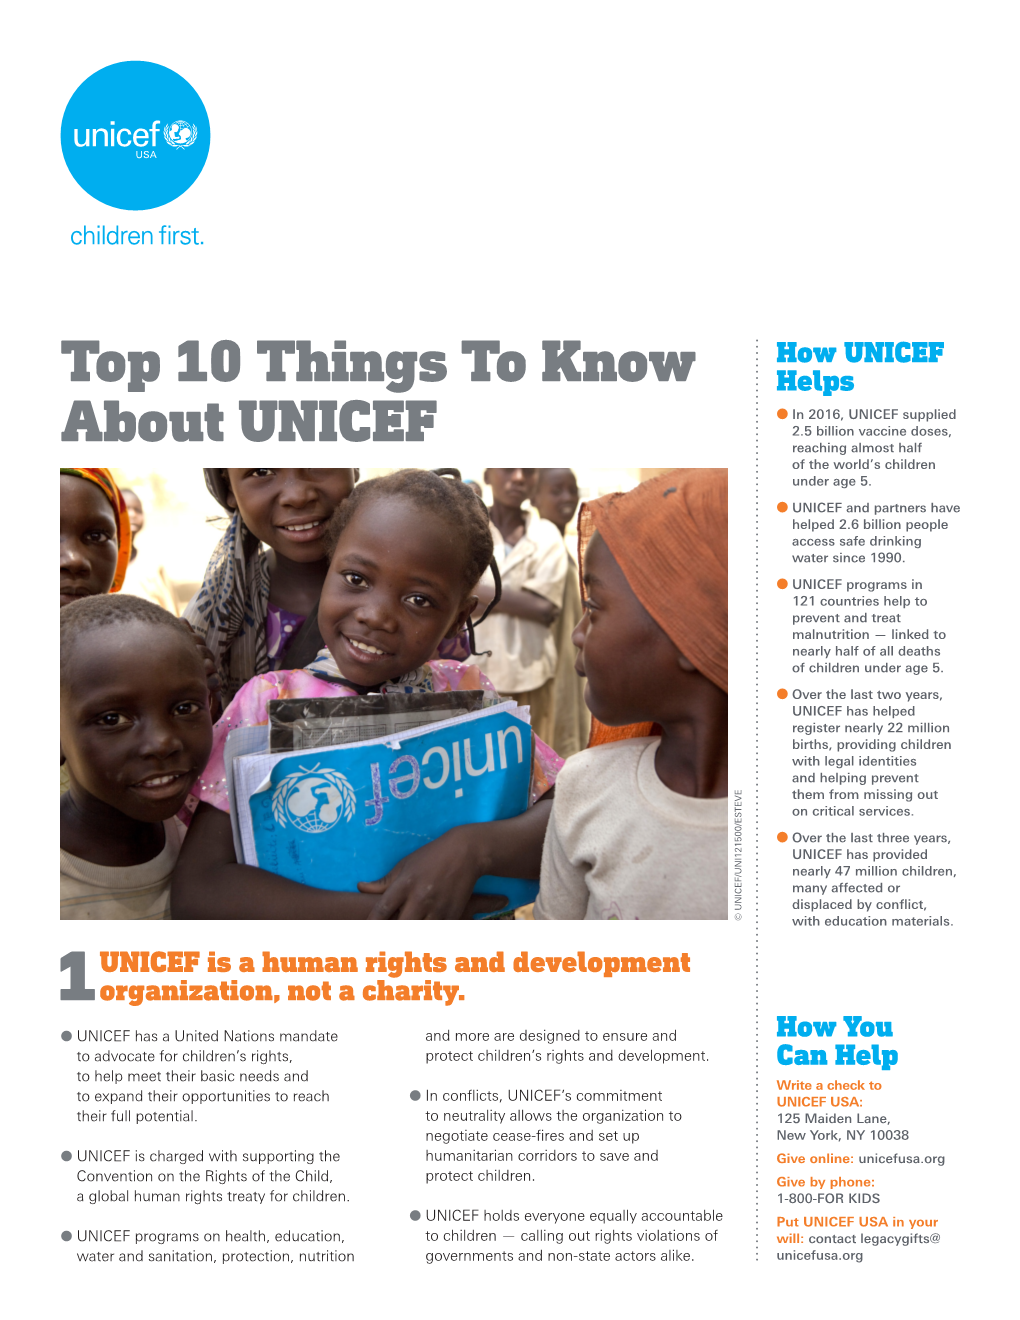 Top 10 Things to Know About UNICEF